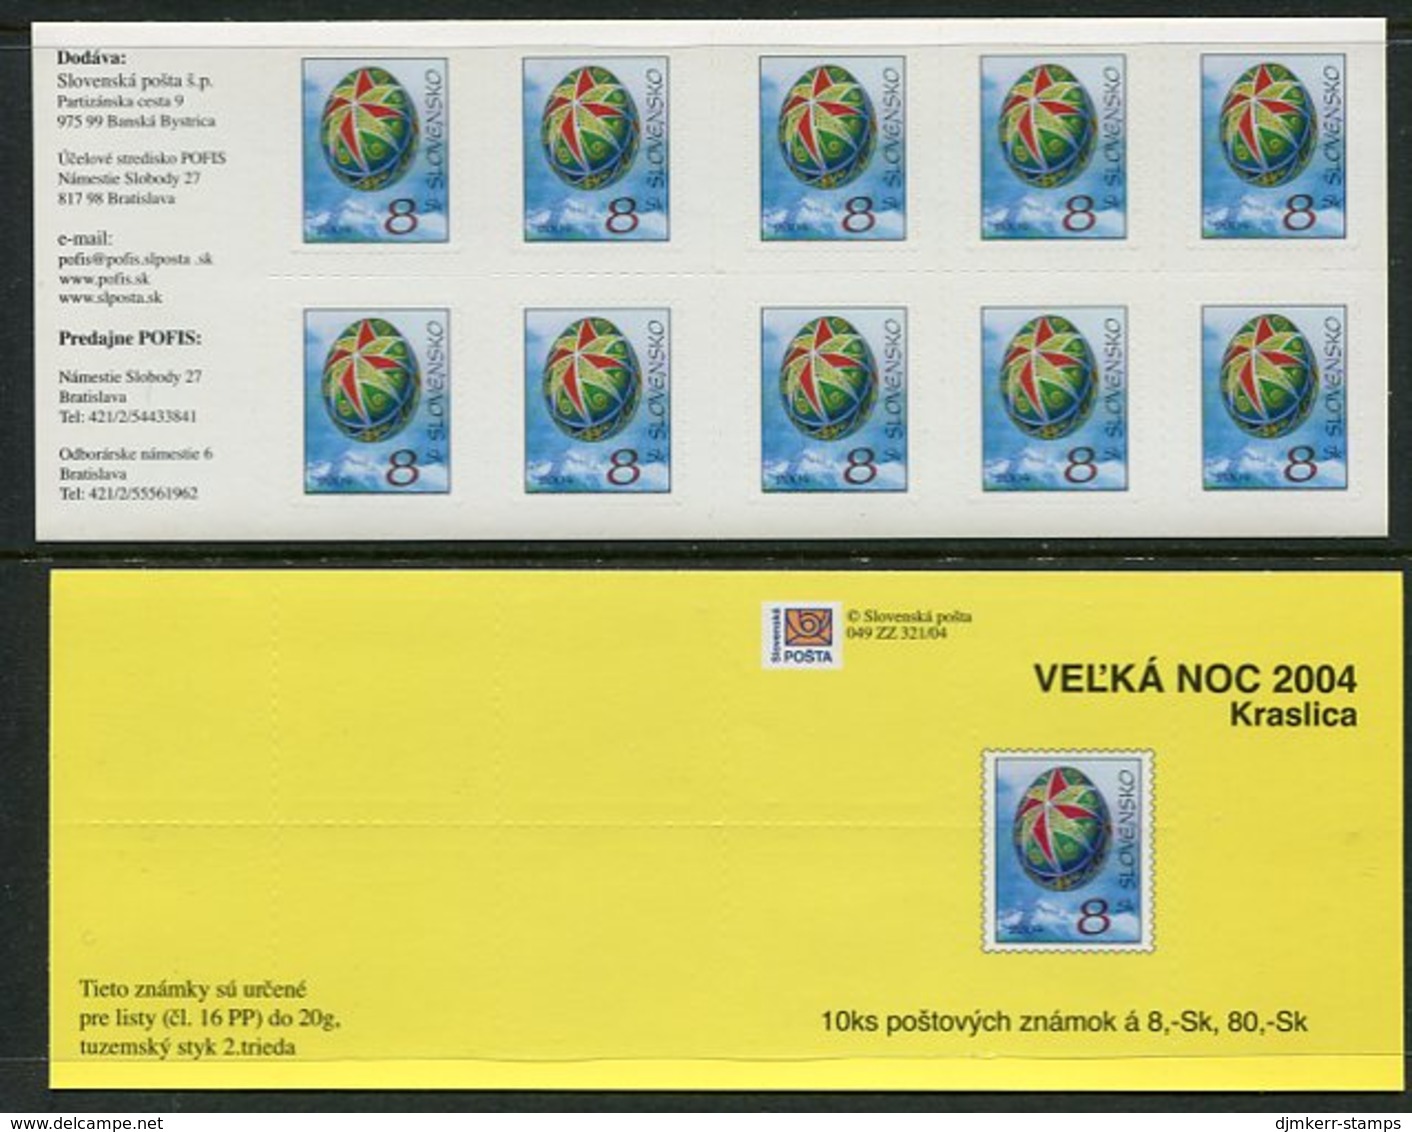 SLOVAKIA 2004 Easter Booklet  MNH / **.  Michel MH0-49 - Neufs